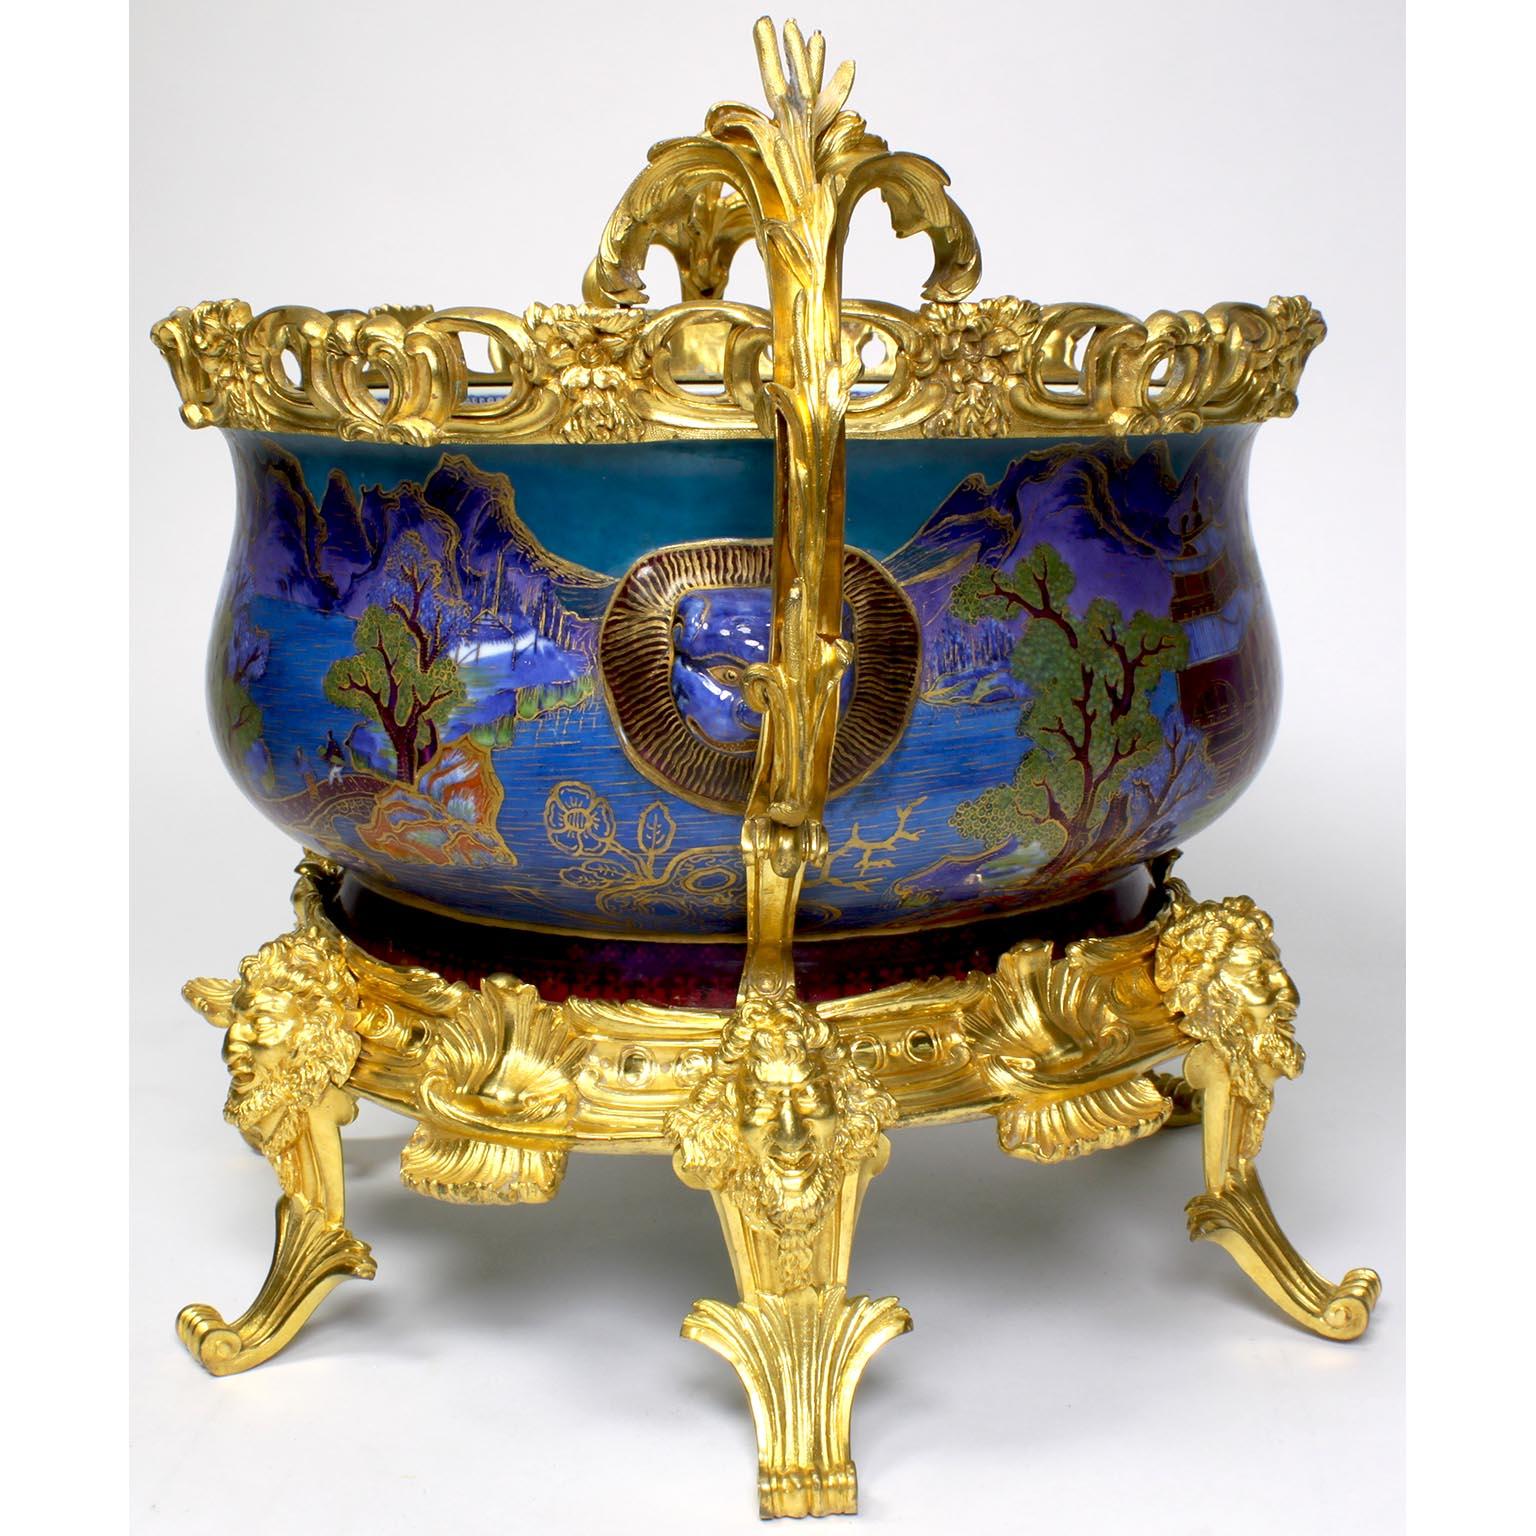 Chinese Export Famille Verte Porcelain & French Ormolu Chinoiserie Centerpiece For Sale 6